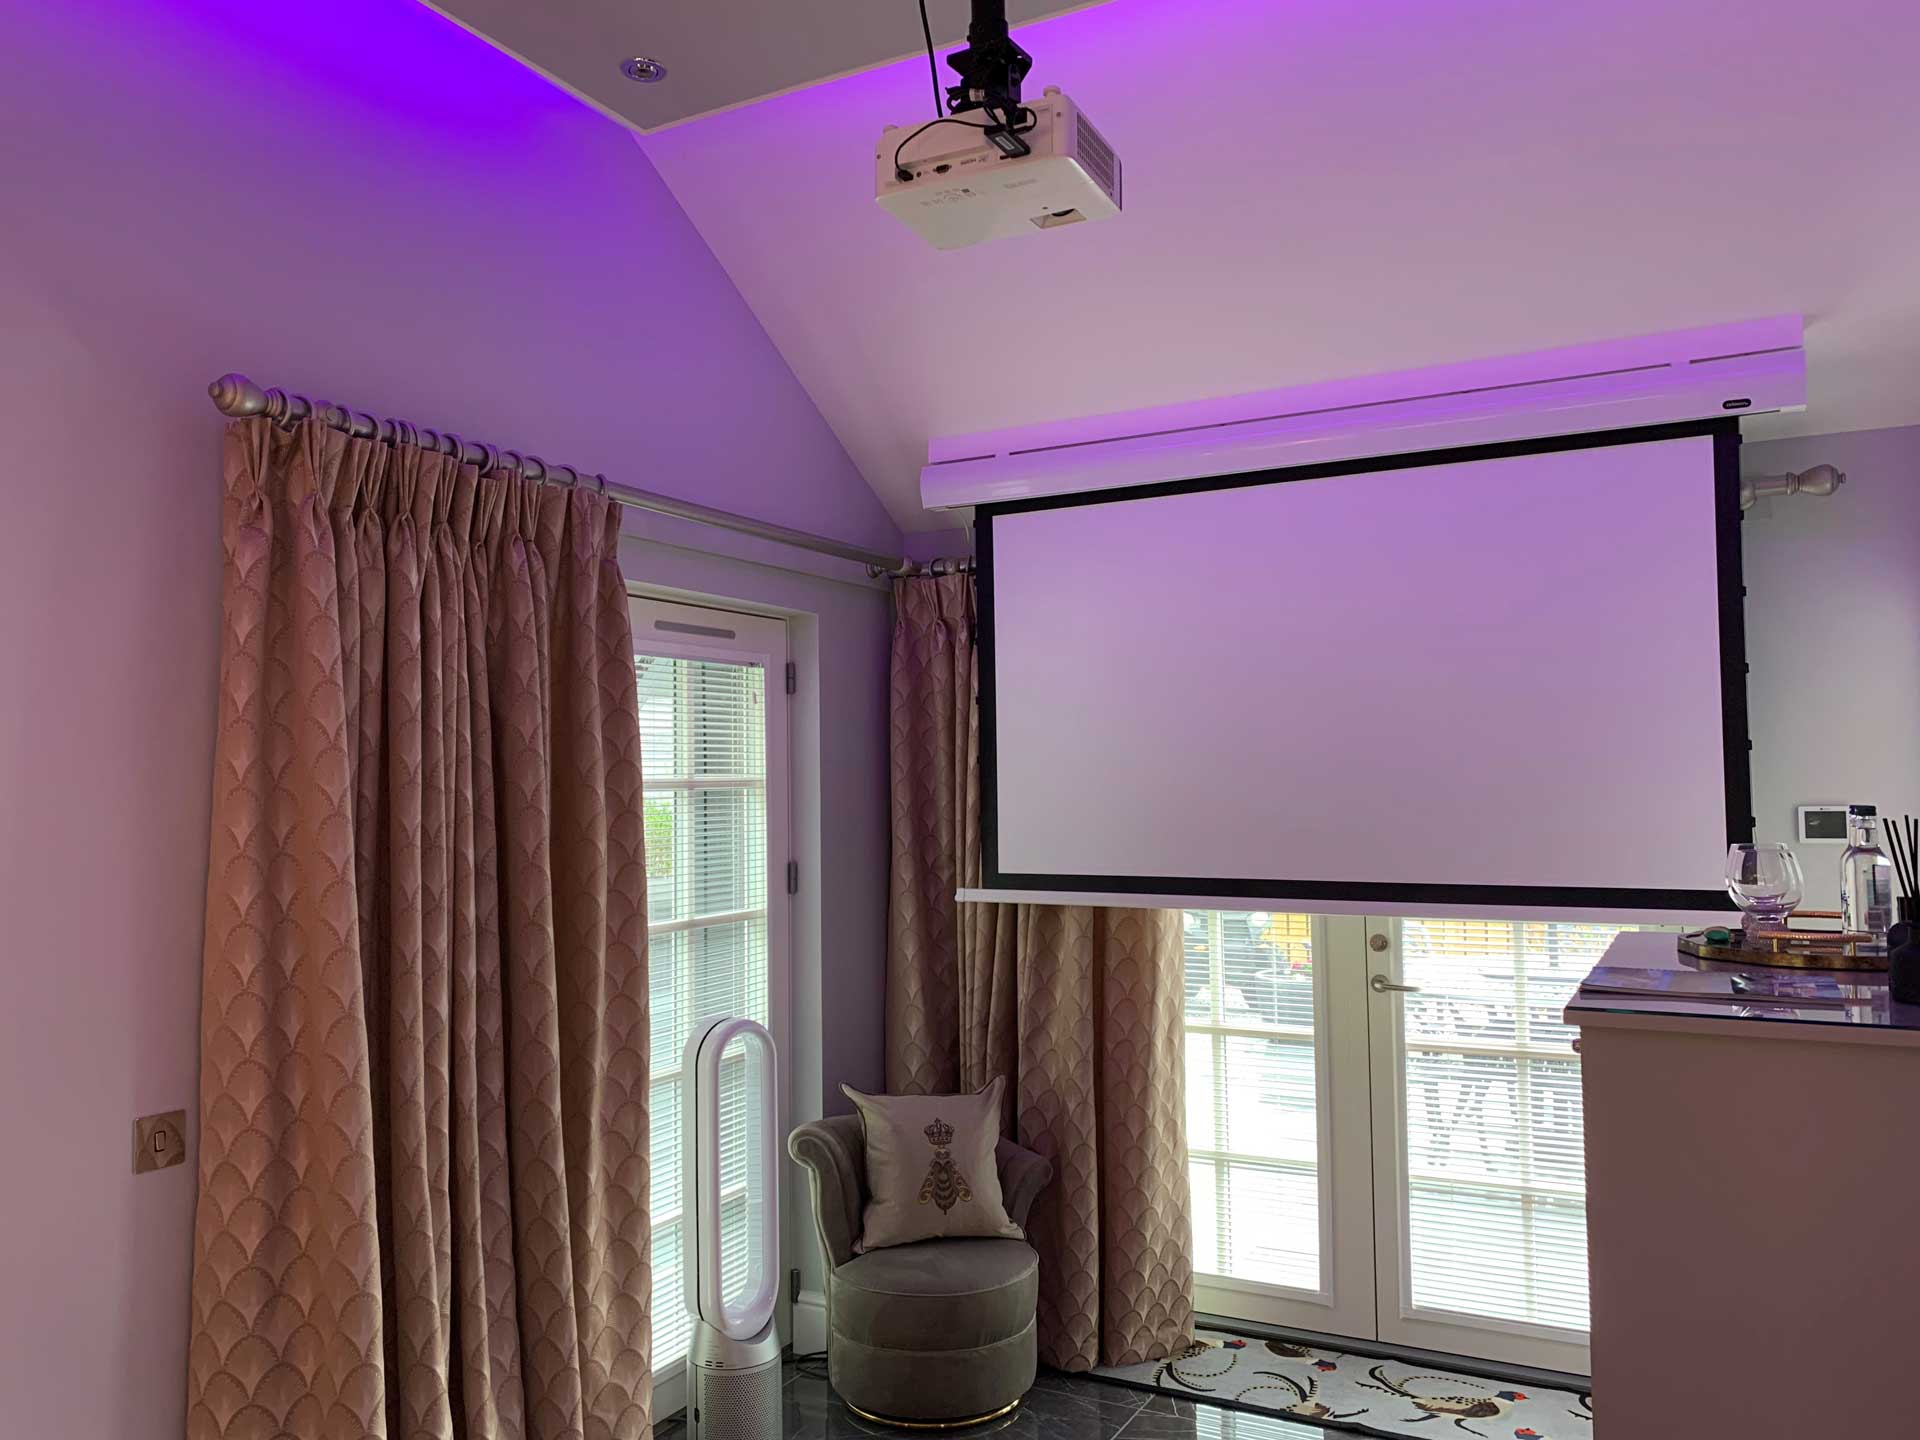 Little Fox Lodge has a Cinema Projector in the bedroom for cosy Netflix nights catching up on your favourite shows